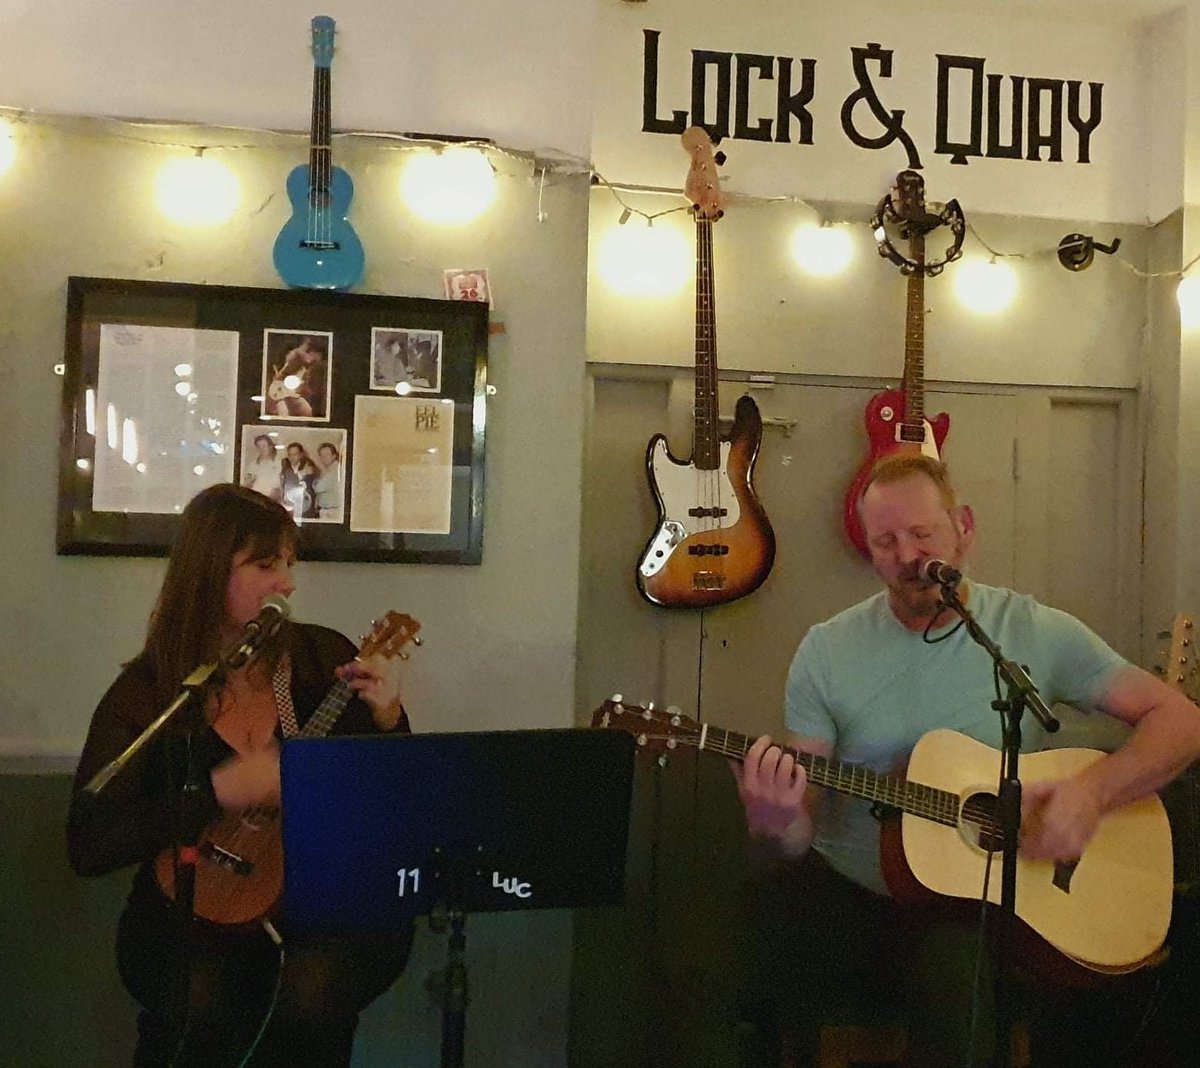 Happy Friday!!! Hope you're all ready for tonight's live stream!!! See you in an hour🍻🎼
#lockandquaybootle #destinationbootle